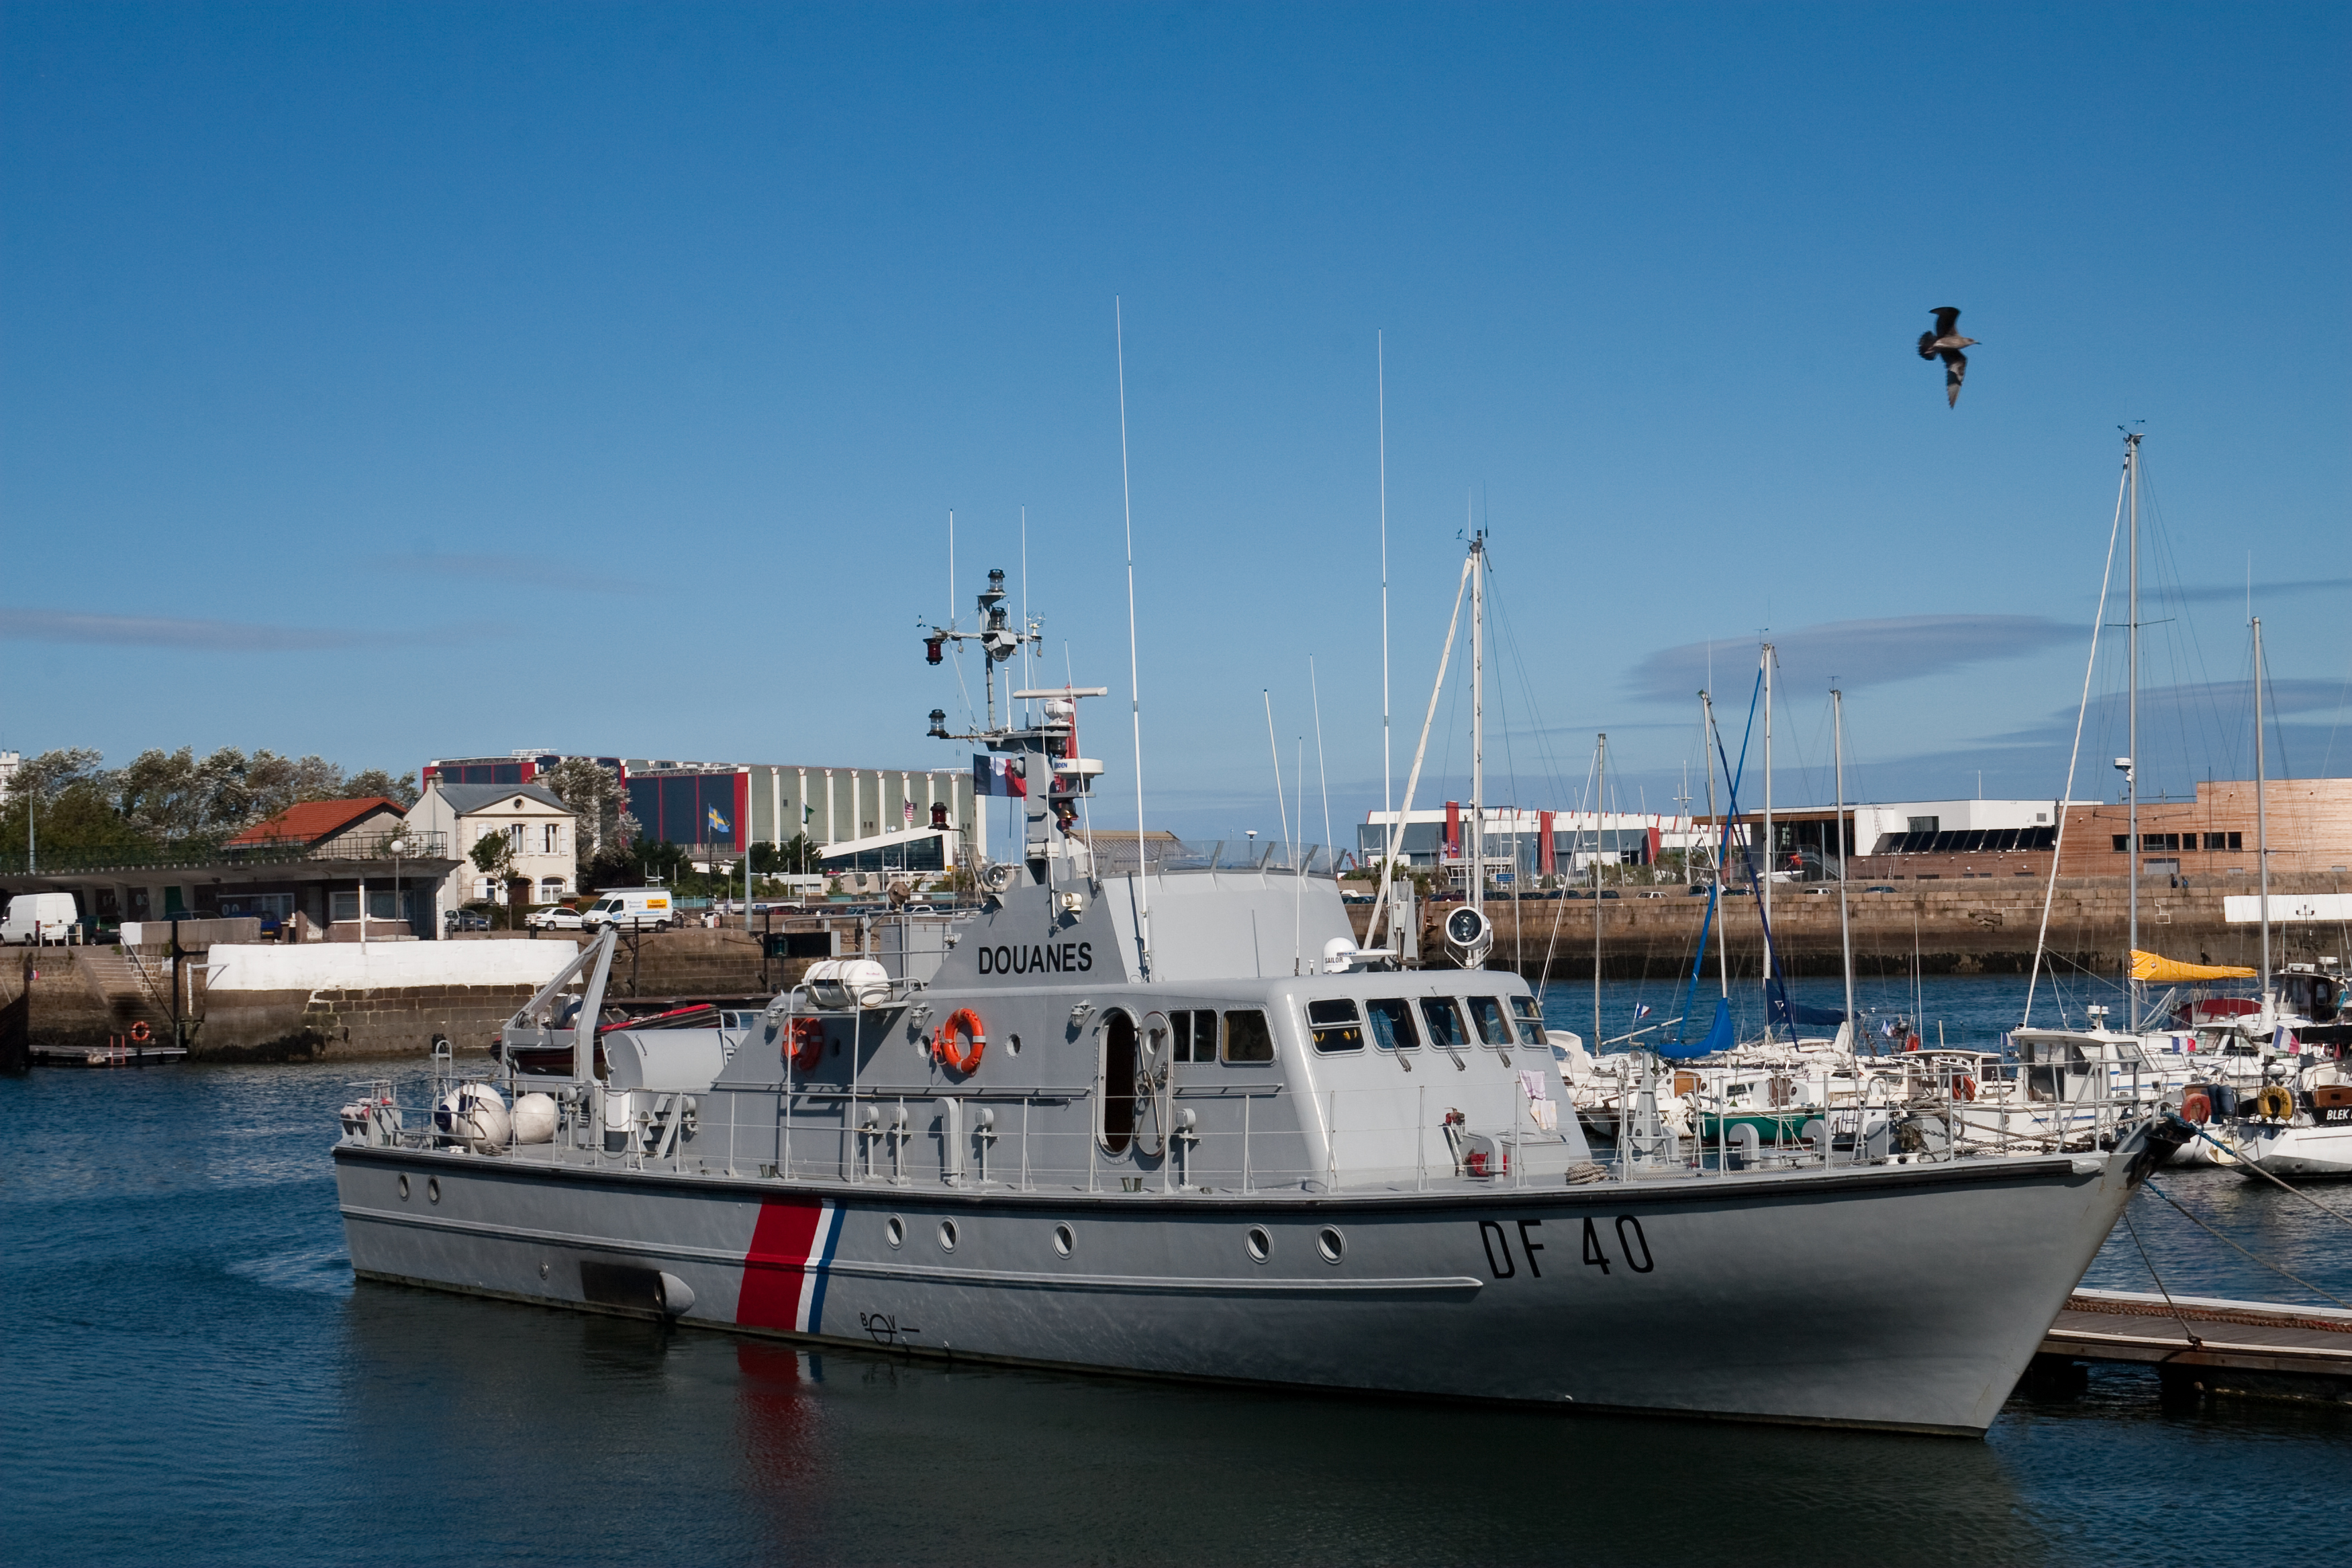 Cherbourg Harbour DF 40 French Customs Service Patrol Vessel 2009 08 31